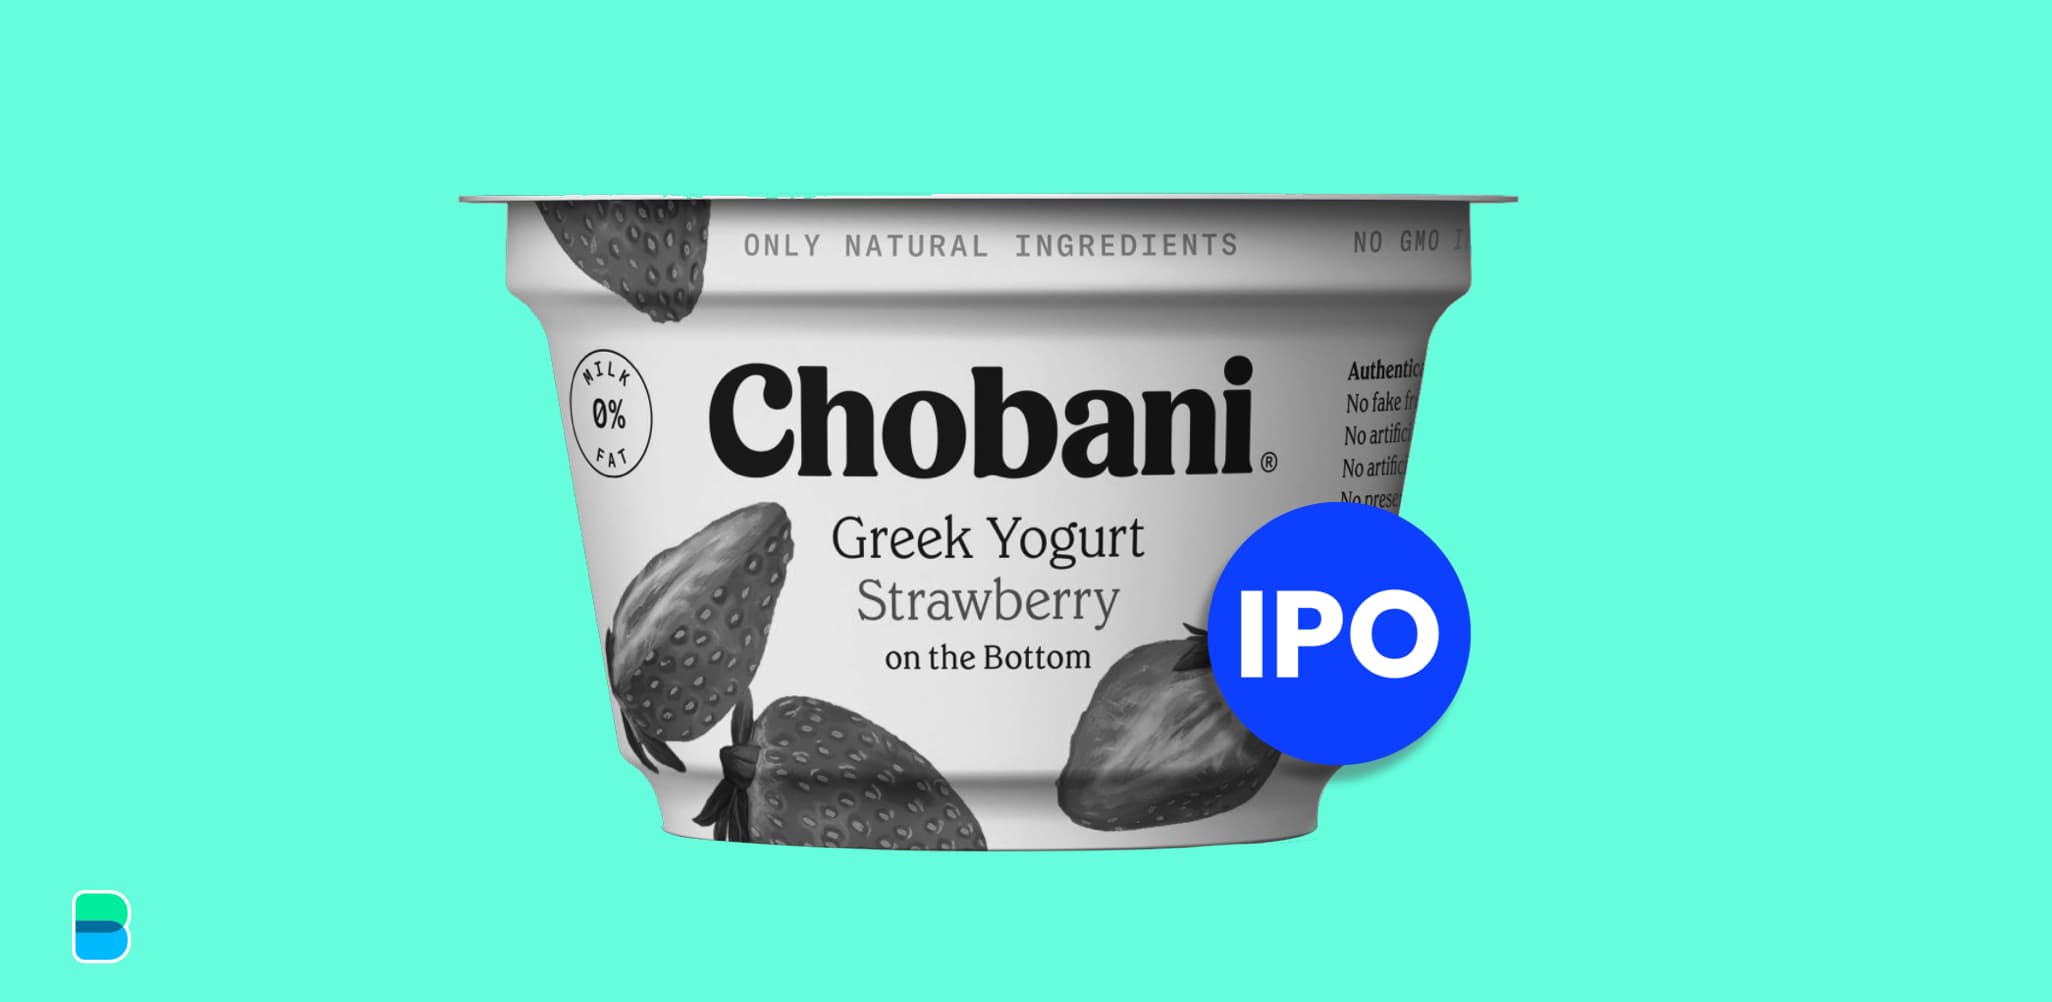 Another plant-based IPO